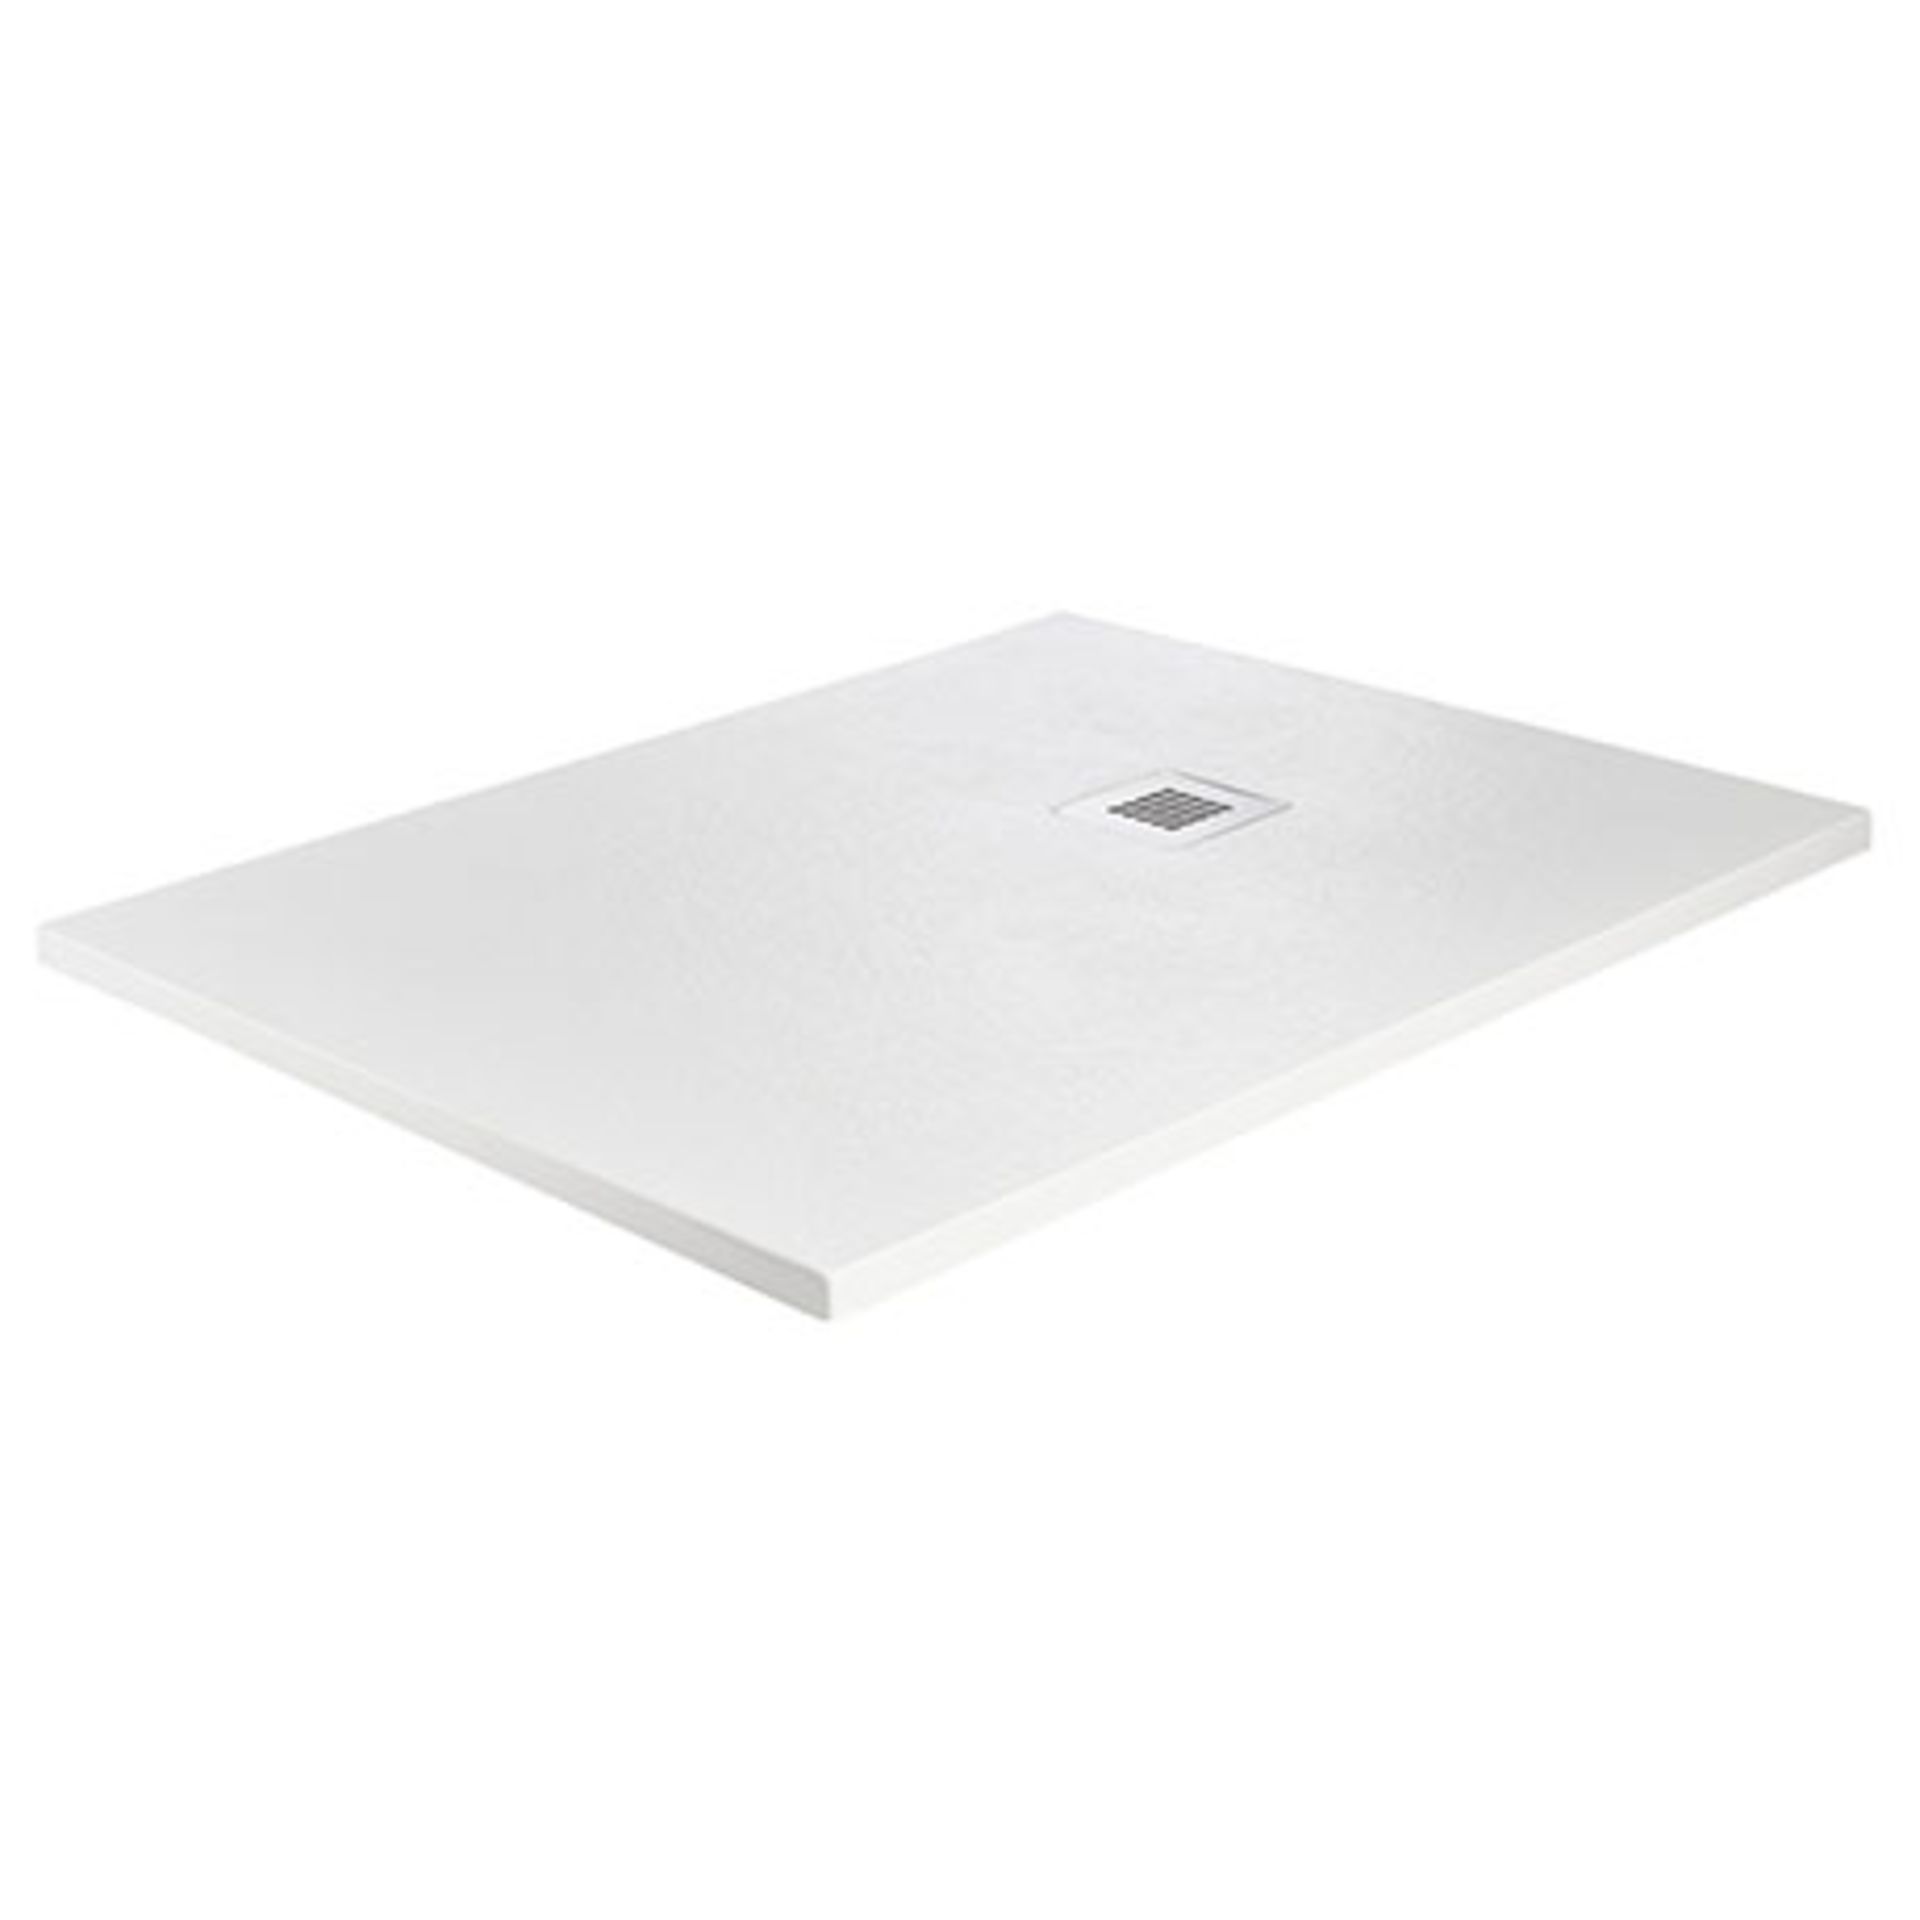 New & Boxed 1200x800mm Rectangular White Slate Effect Shower Tray . RRP £499.99.Hand Crafted From